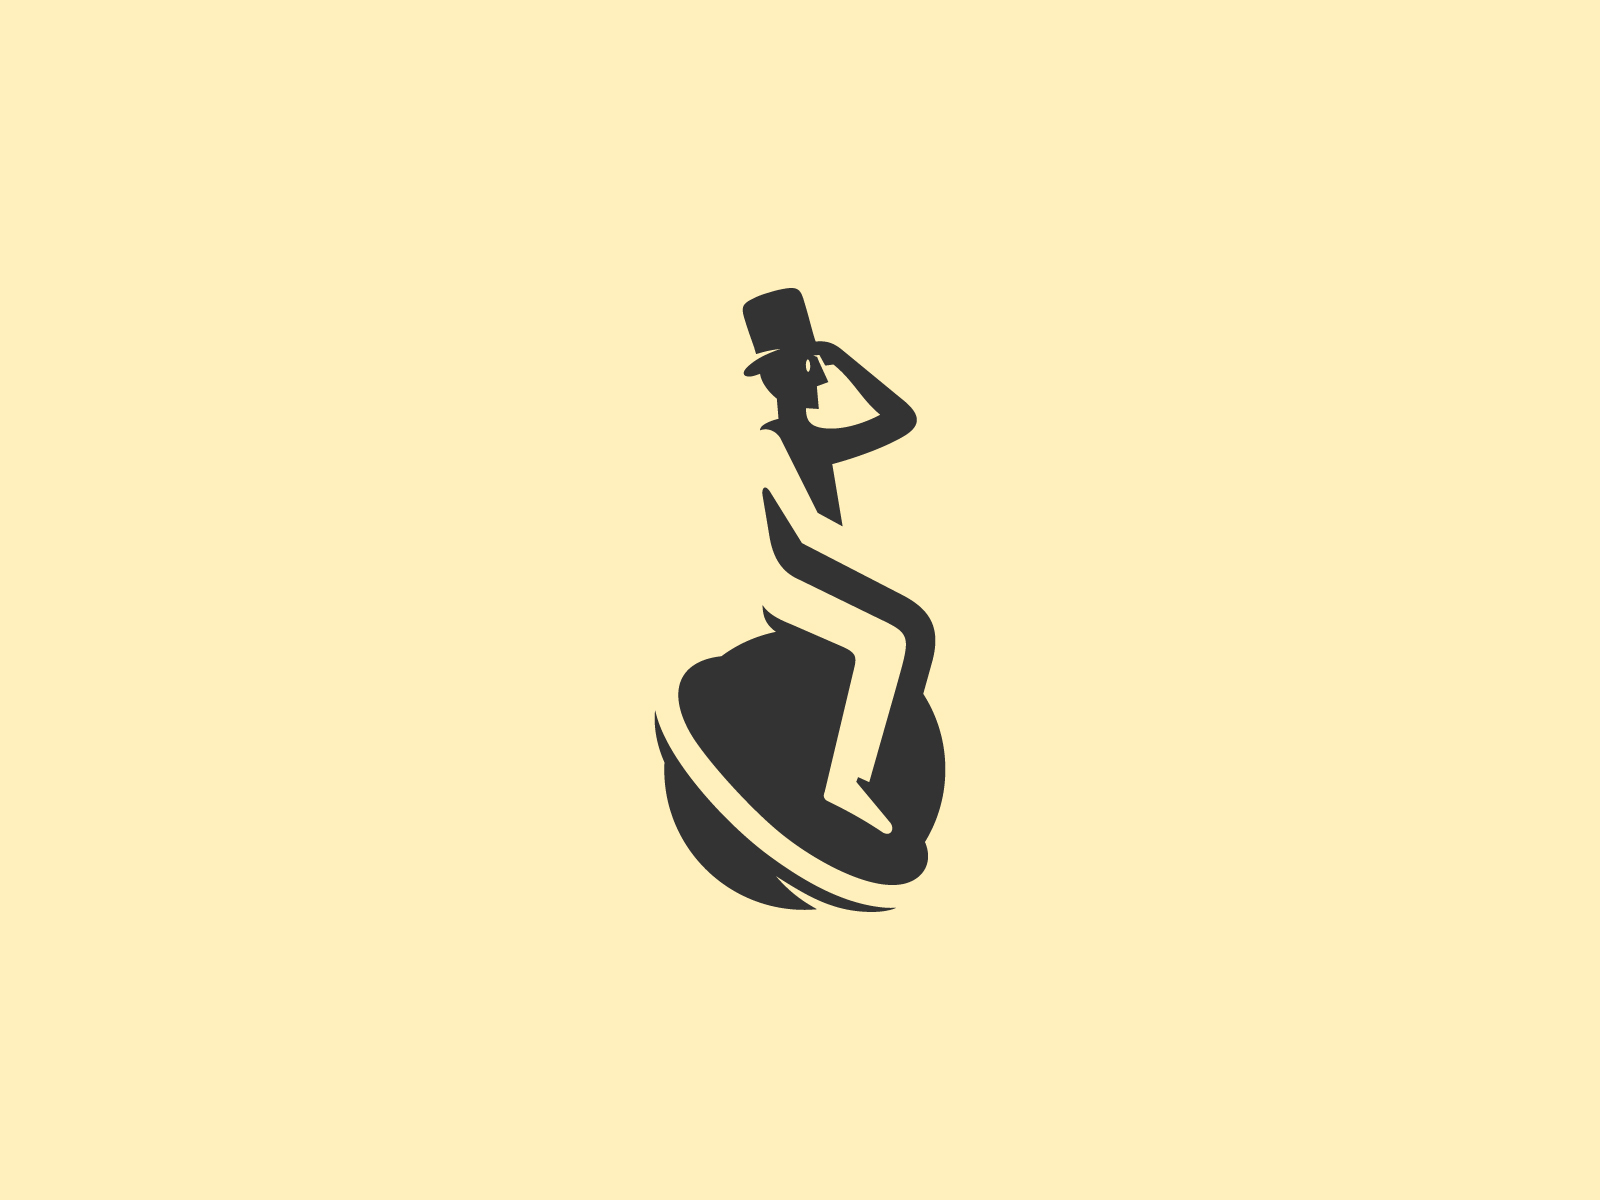 Cannon Ball Riding by ganang bernady on Dribbble